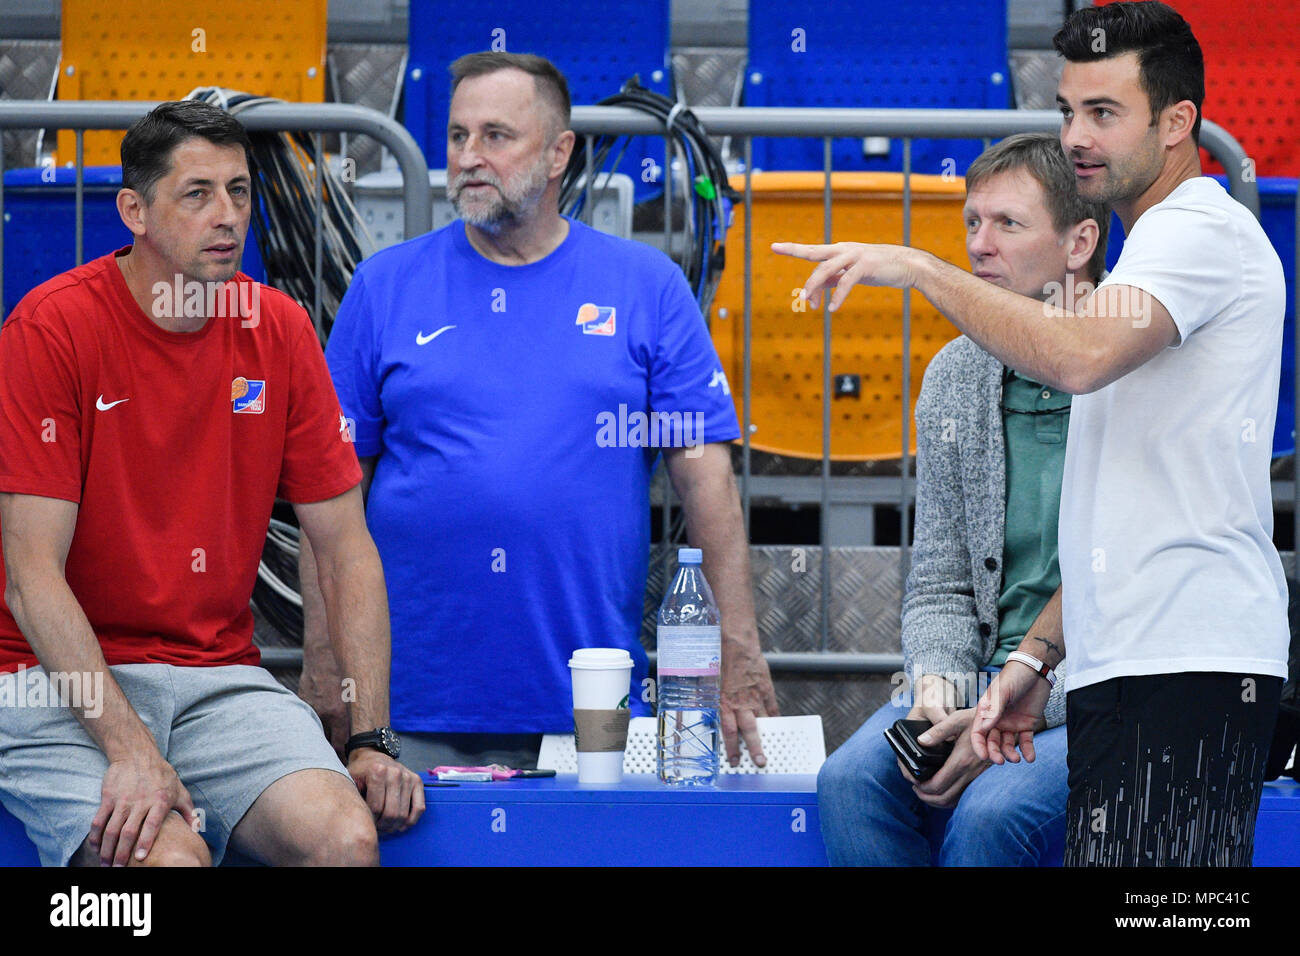 Prague, Czech Republic. 22nd May, 2018. Coach DJ Sackmann (right) trains the Czech Republic women´s national basketball team during the Day for media in Prague, Czech Republic, May 22, 2018. Coach of Czech Team Stefan Svitek (left) looks at the training session. Credit: Michal Kamaryt/CTK Photo/Alamy Live News Stock Photo